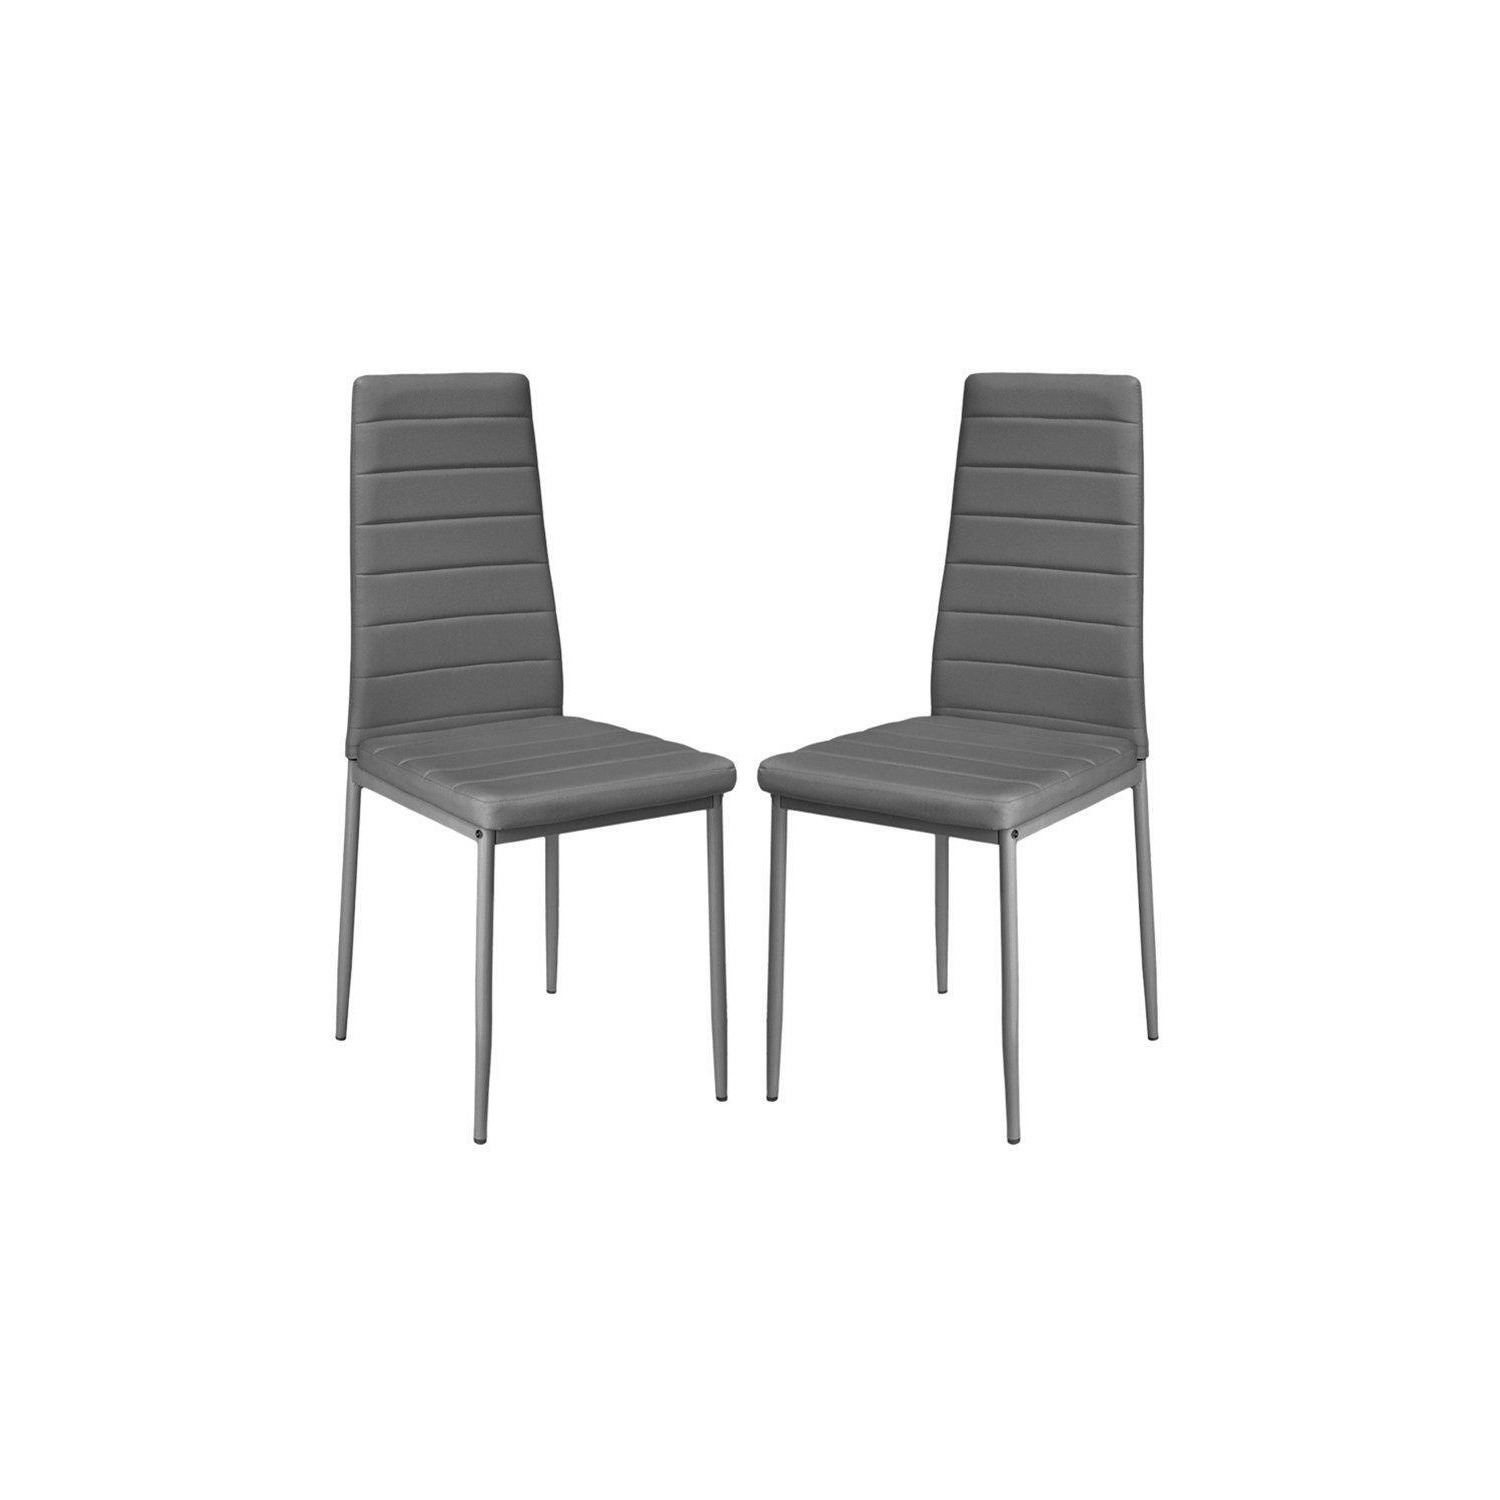 2pcs Armless PU Leather High Back Dining Chairs